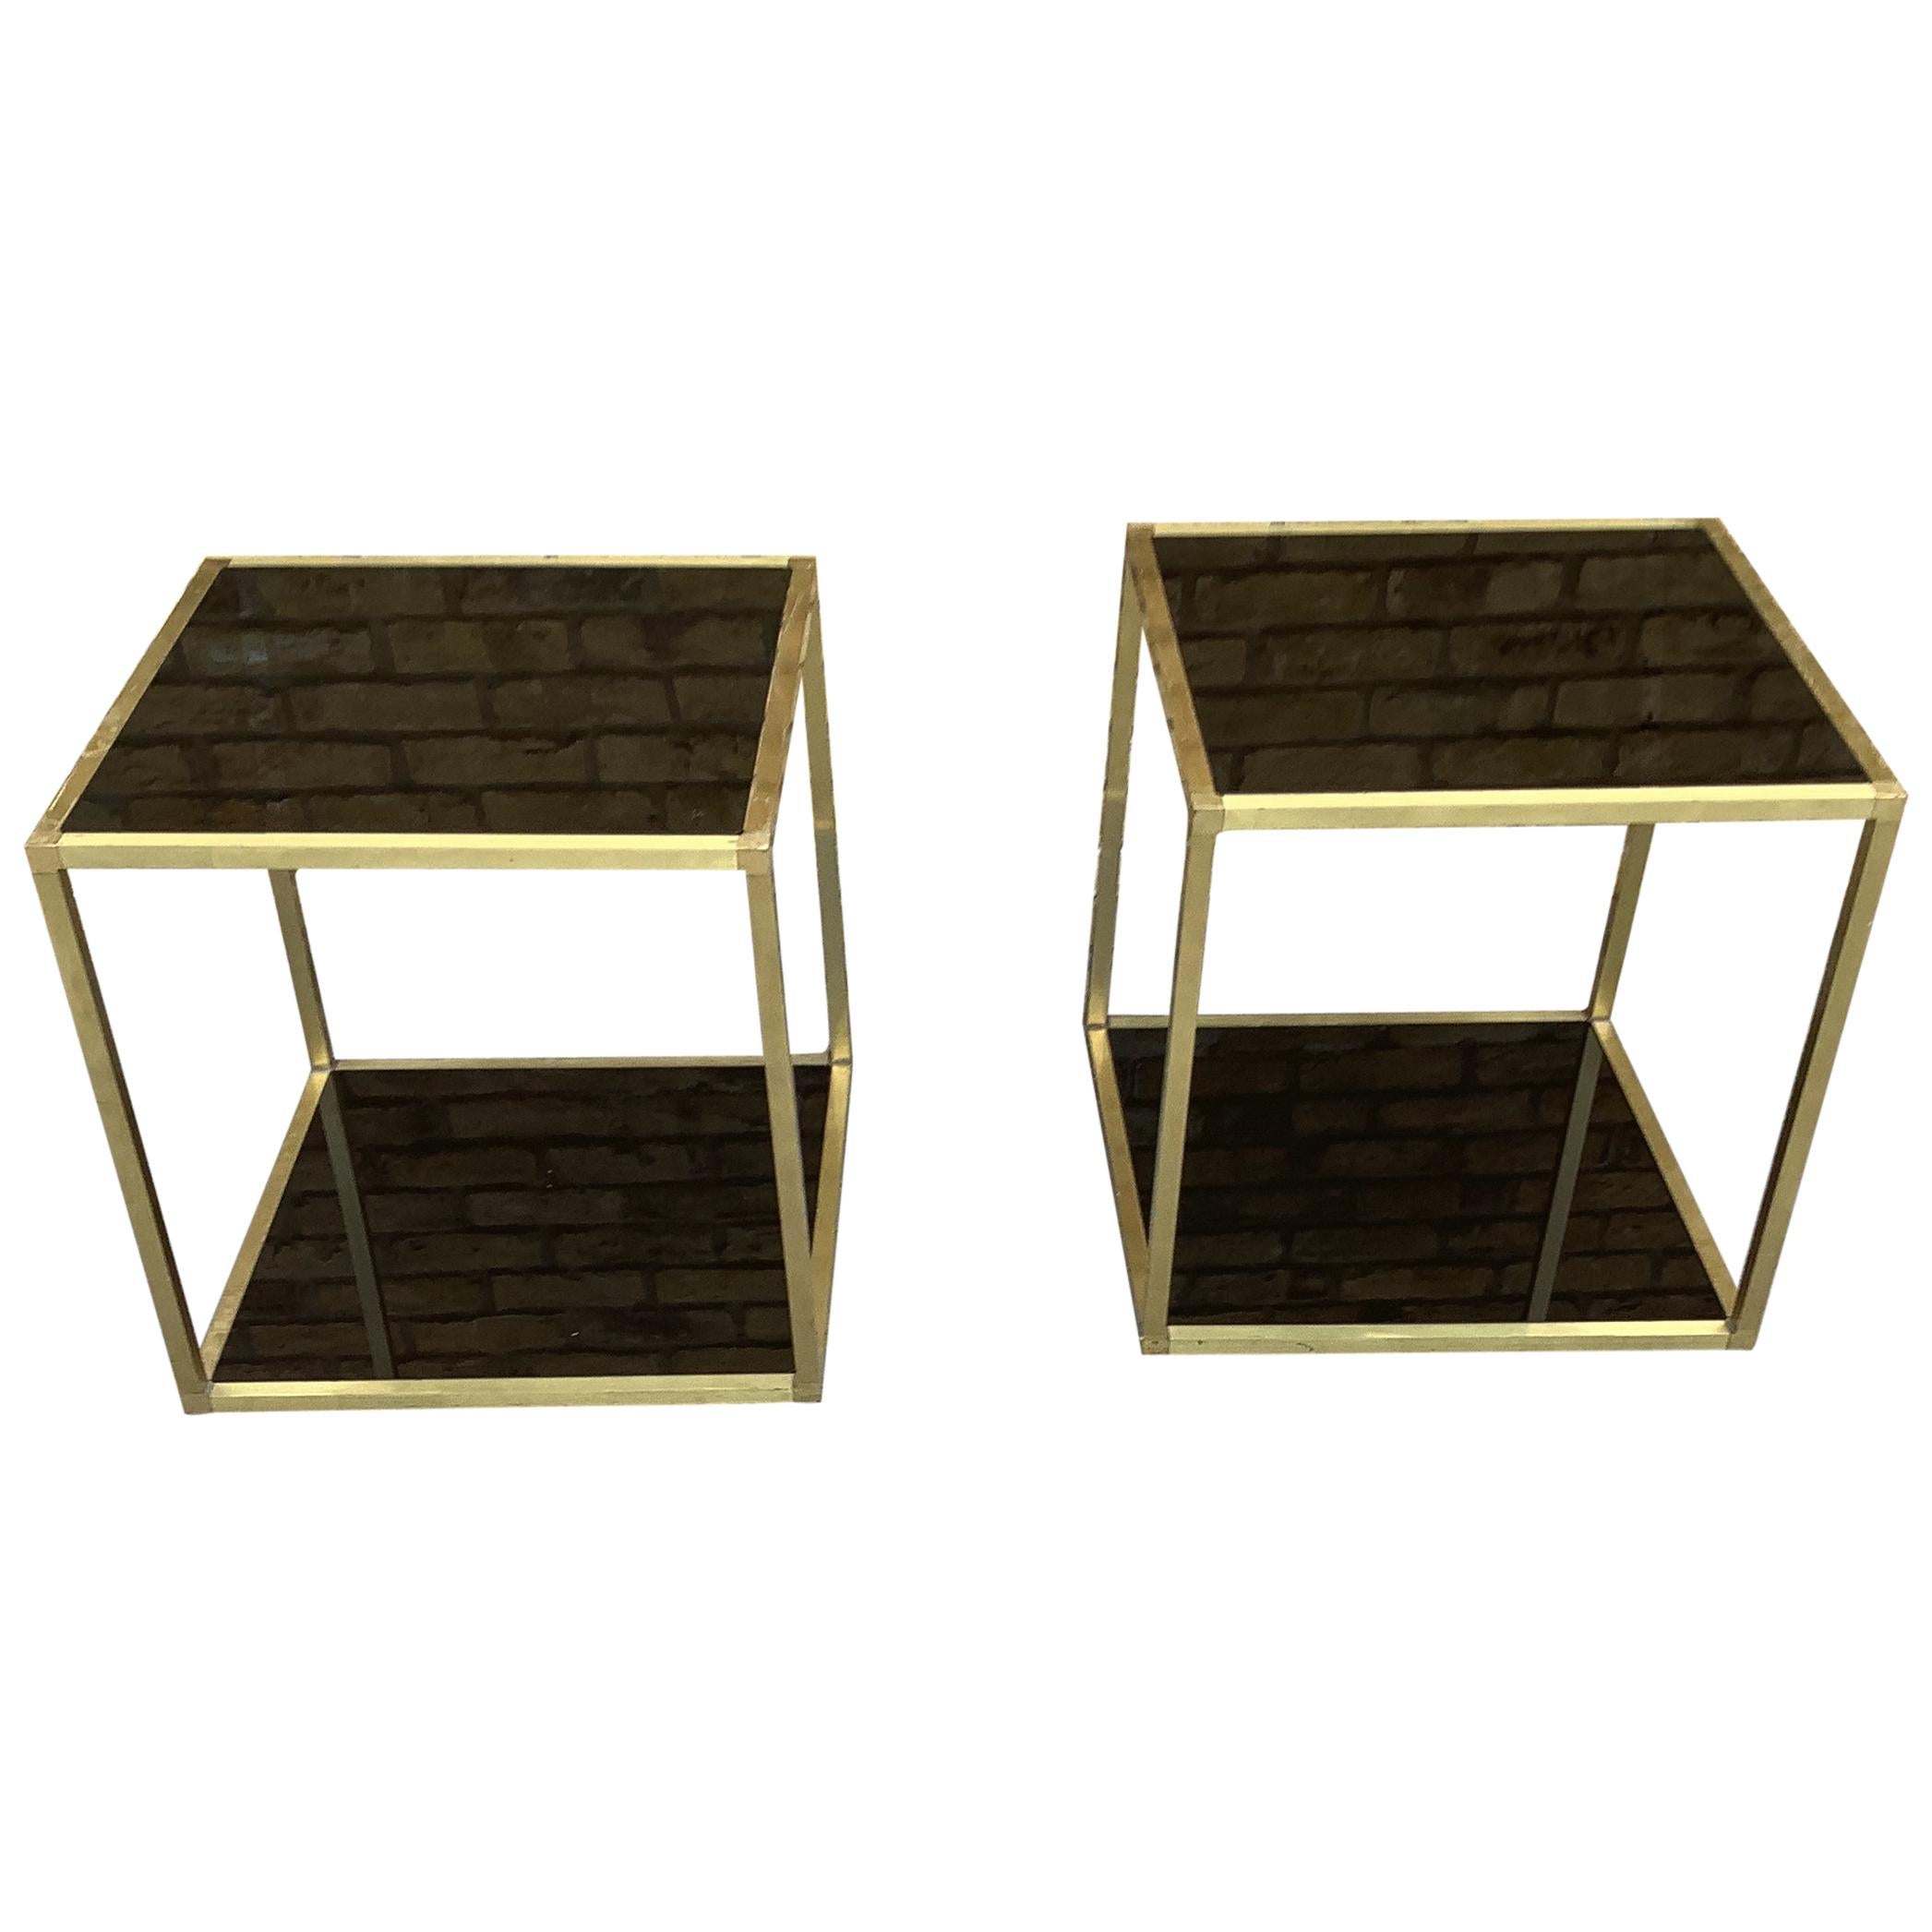 Pair of 1970’s Italian Brass and Glass Display Table